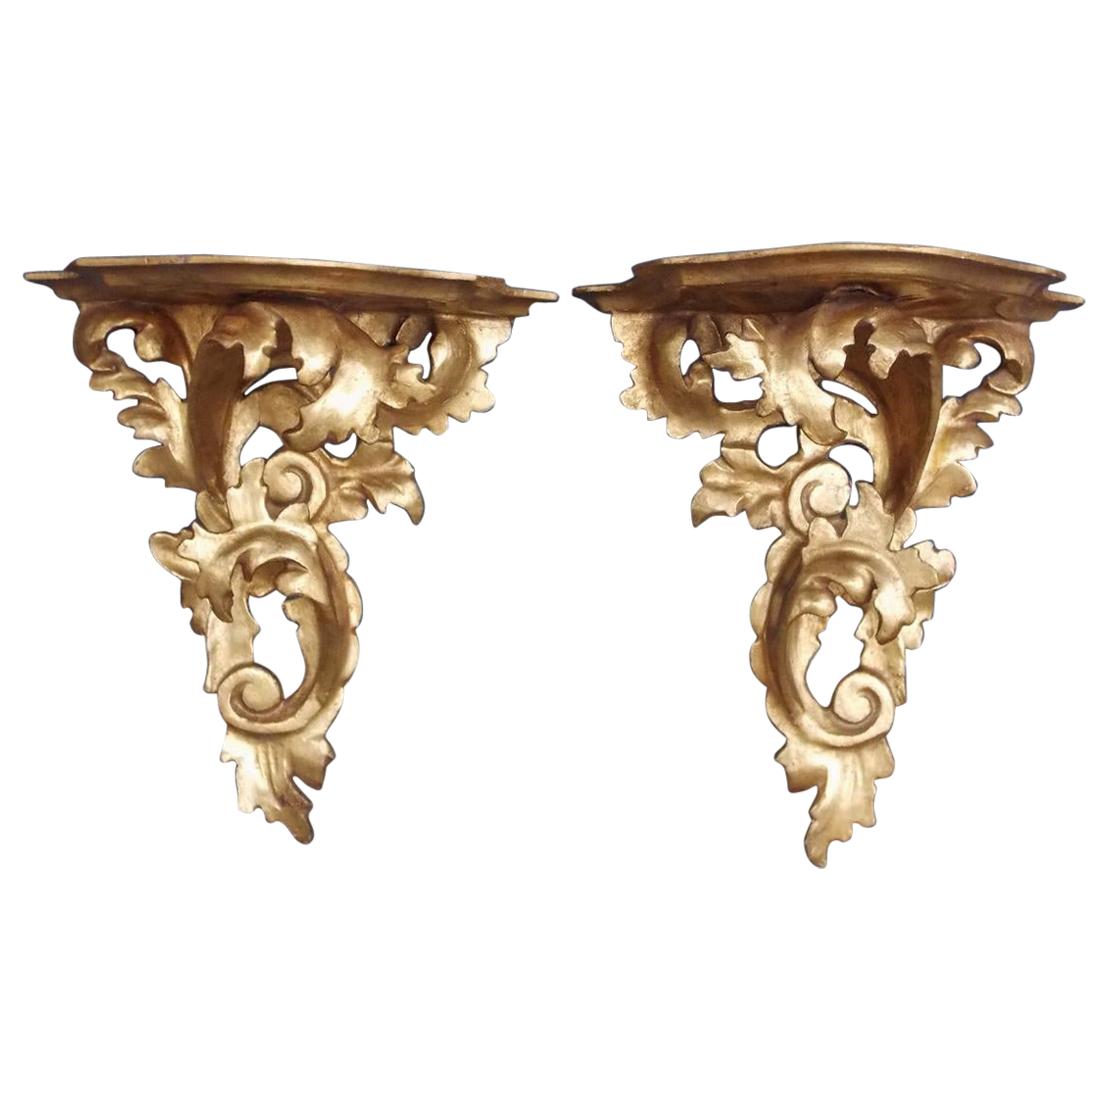 Pair of French Gilt Carved Wood Floral Scrolled & Scalloped Wall Brackets C 1850